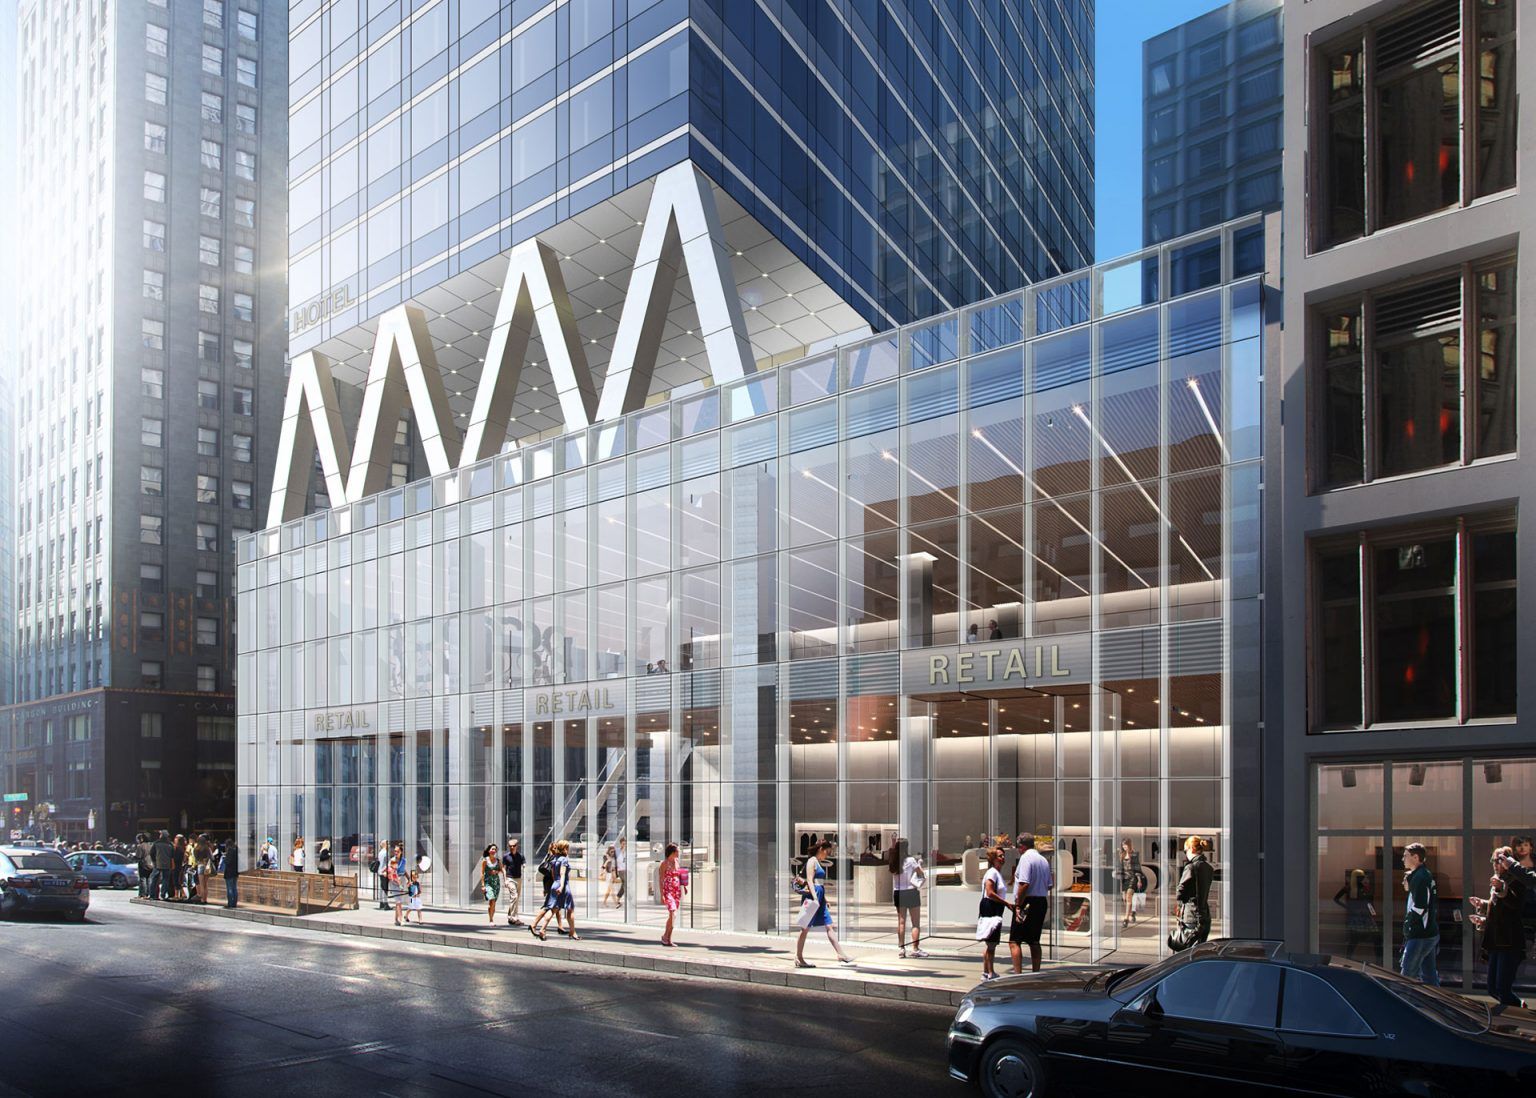 300 N Michigan Tops Out At 47 Stories In The Loop